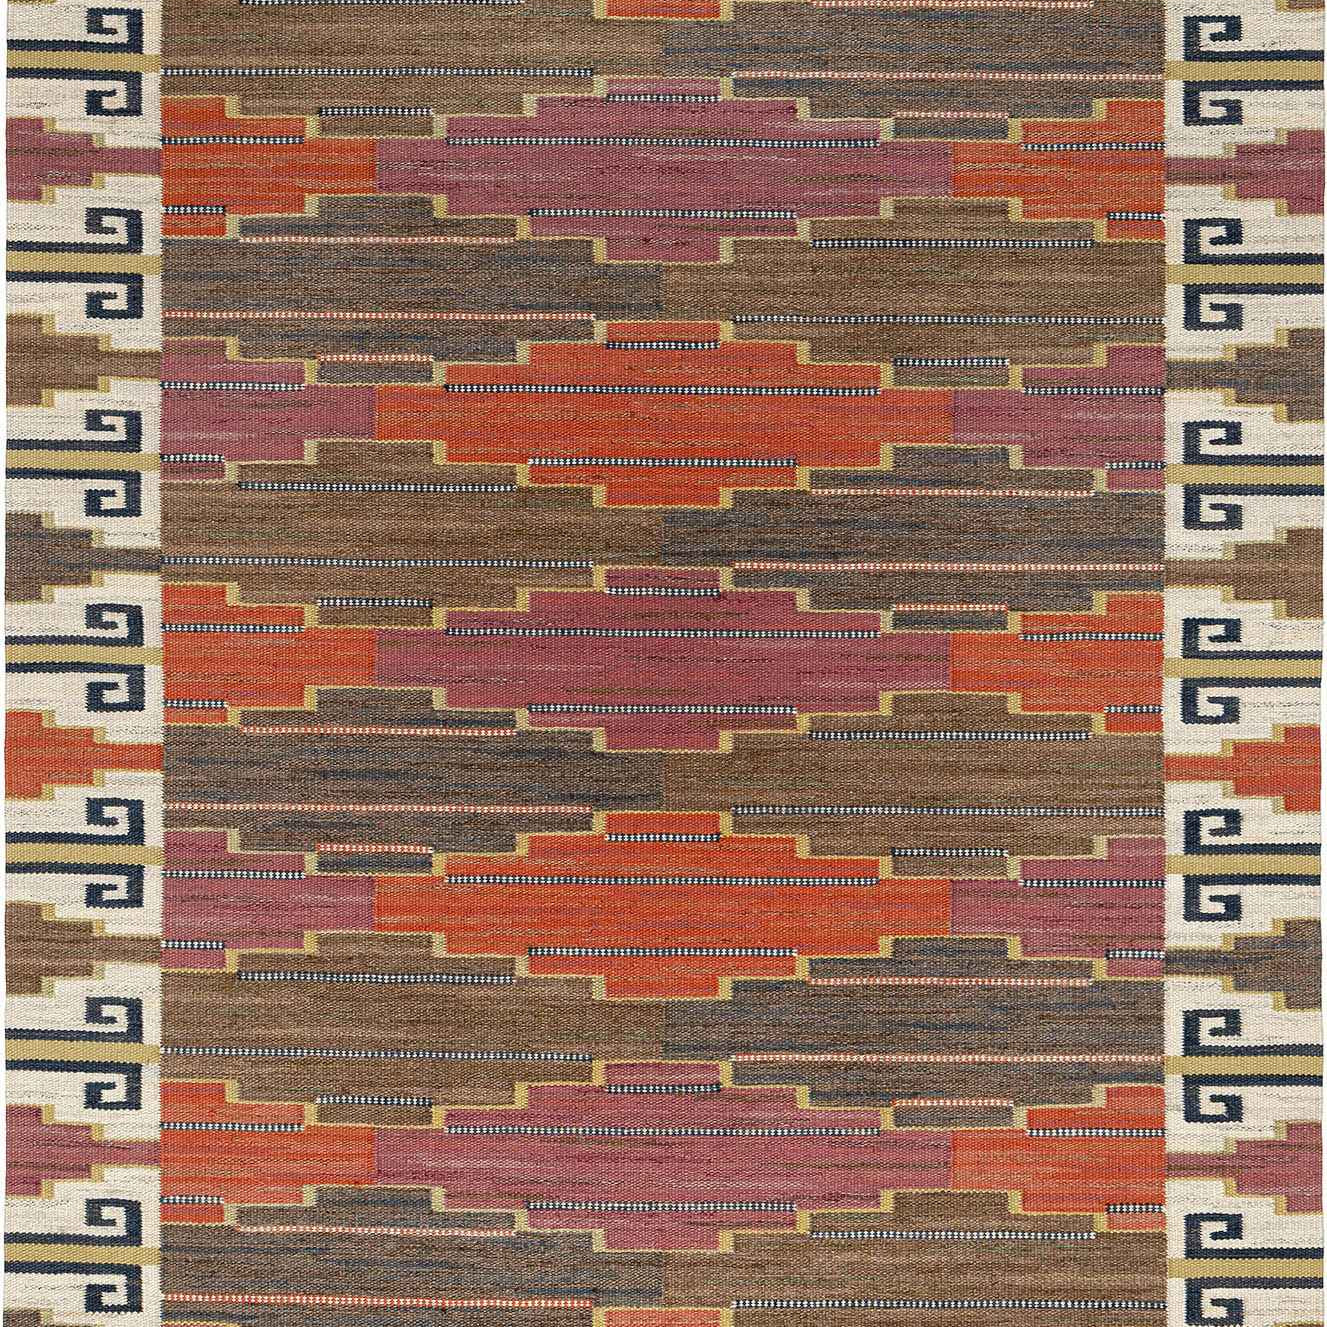 Rugs – made-to-order, vintage and in-stock